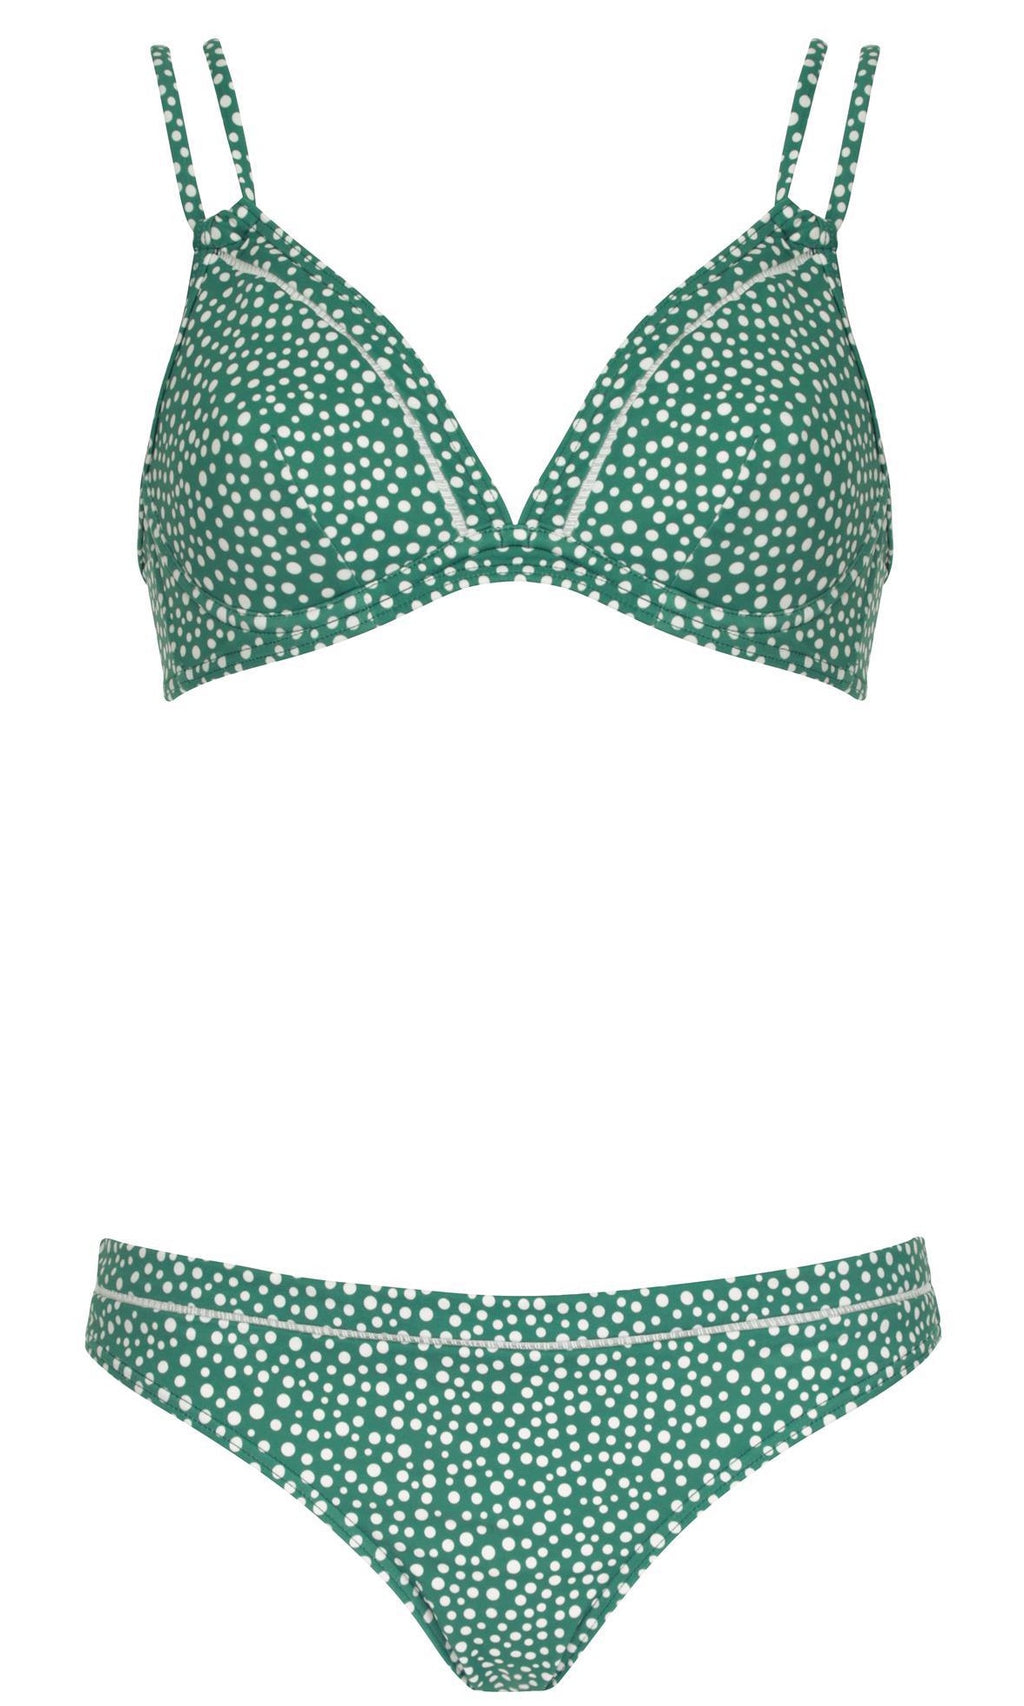 Bikini Set Emerald Park, Special Order B Cup to G Cup